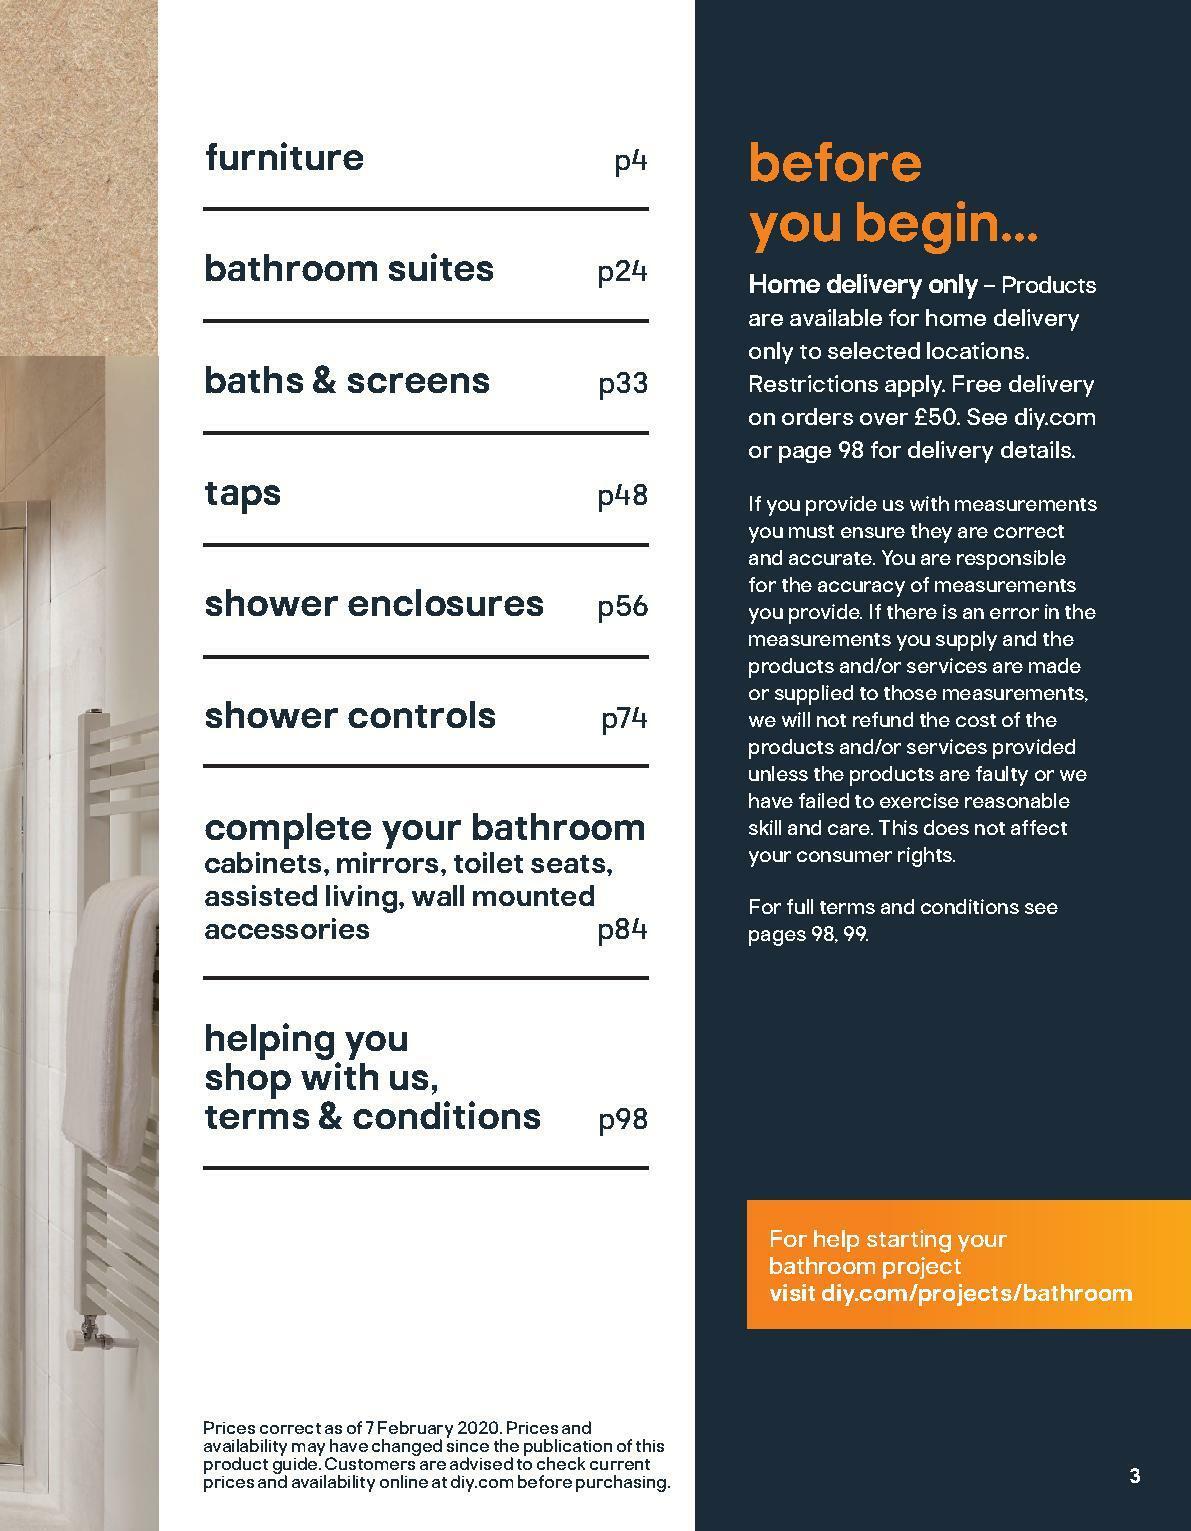 B&Q Bathroom Product Guide Offers from 7 February